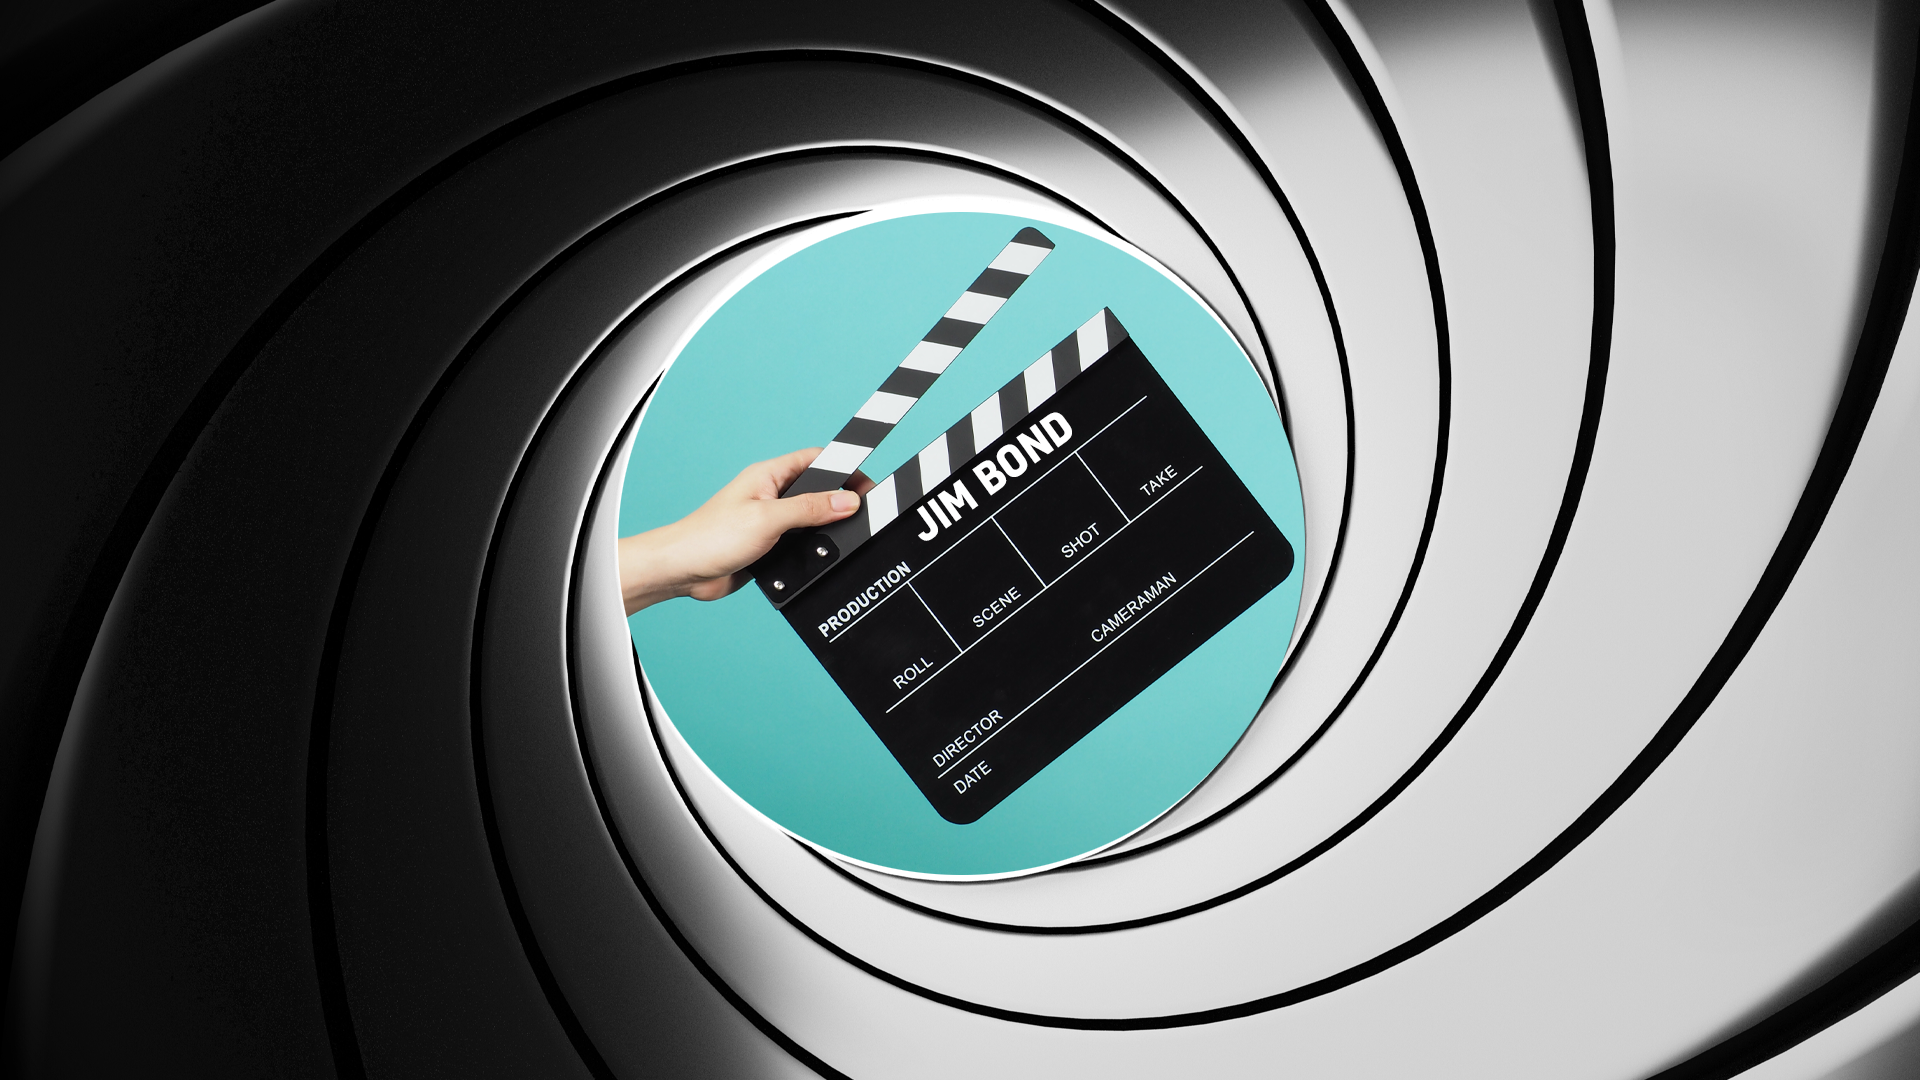 A James Bond style clapperboard